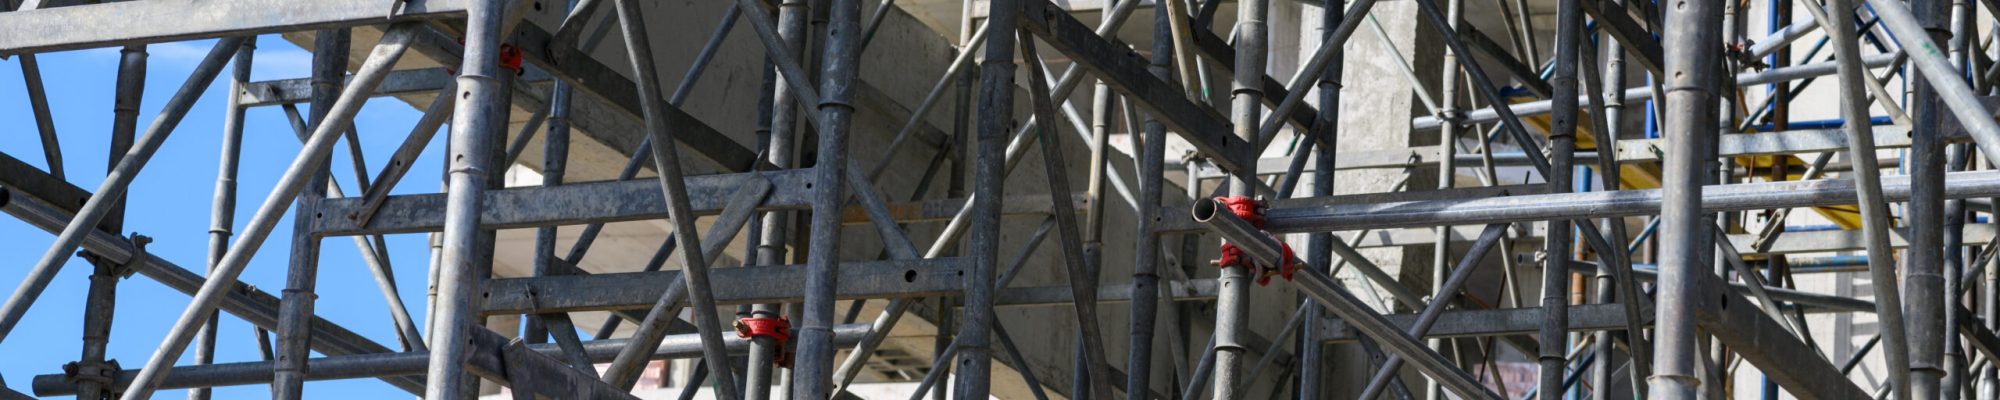 Sophisticated scaffolding system to create complex shapes during construction.